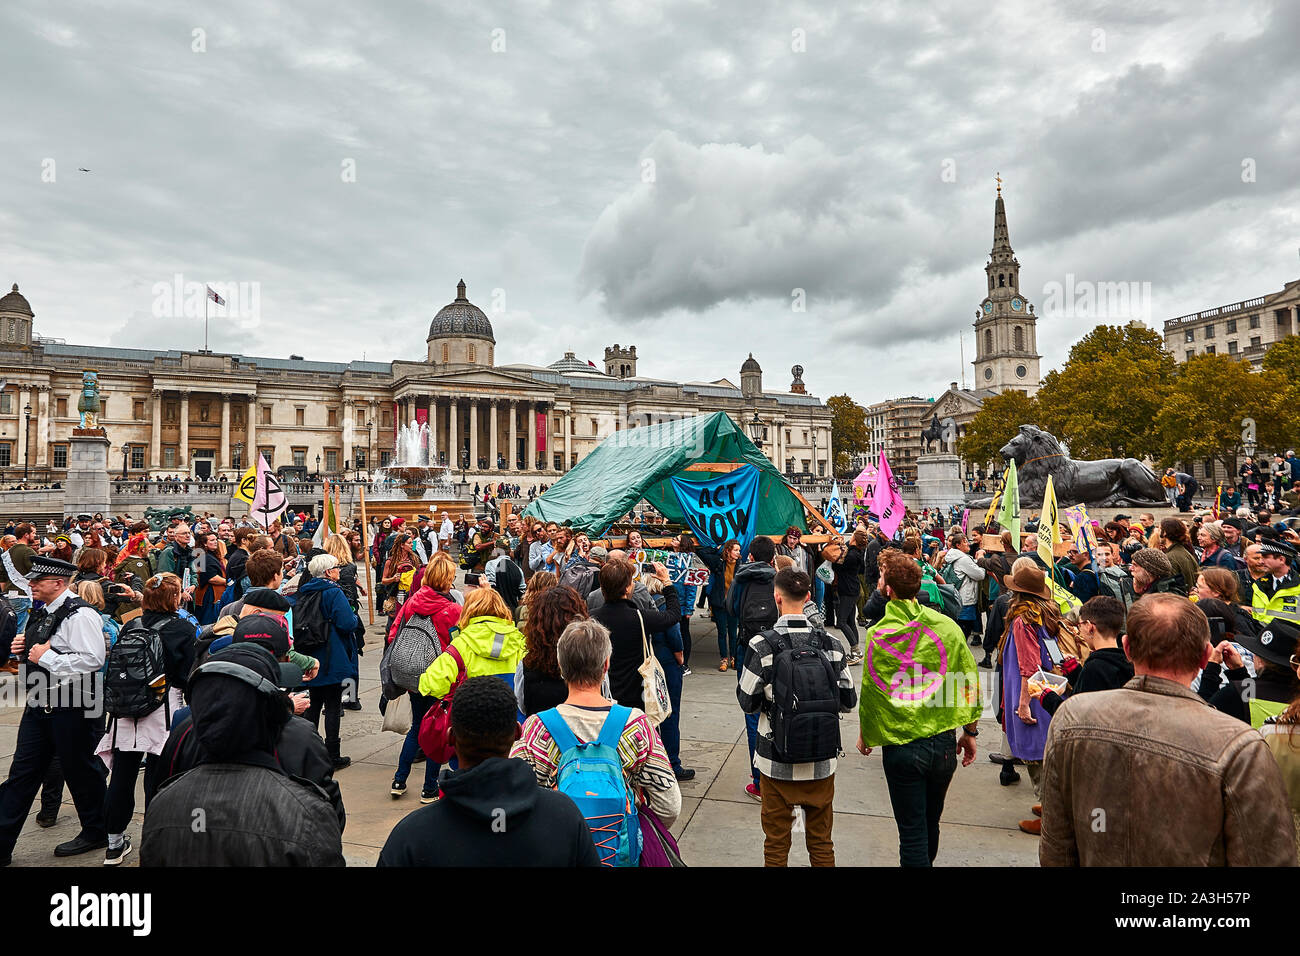 London, U.K. - Oct 8, 2019: Crowds surround a wooden canopy erected on the second day of an occupation of Trafalgar Square by campaigners from Extinction Rebellion. Stock Photo